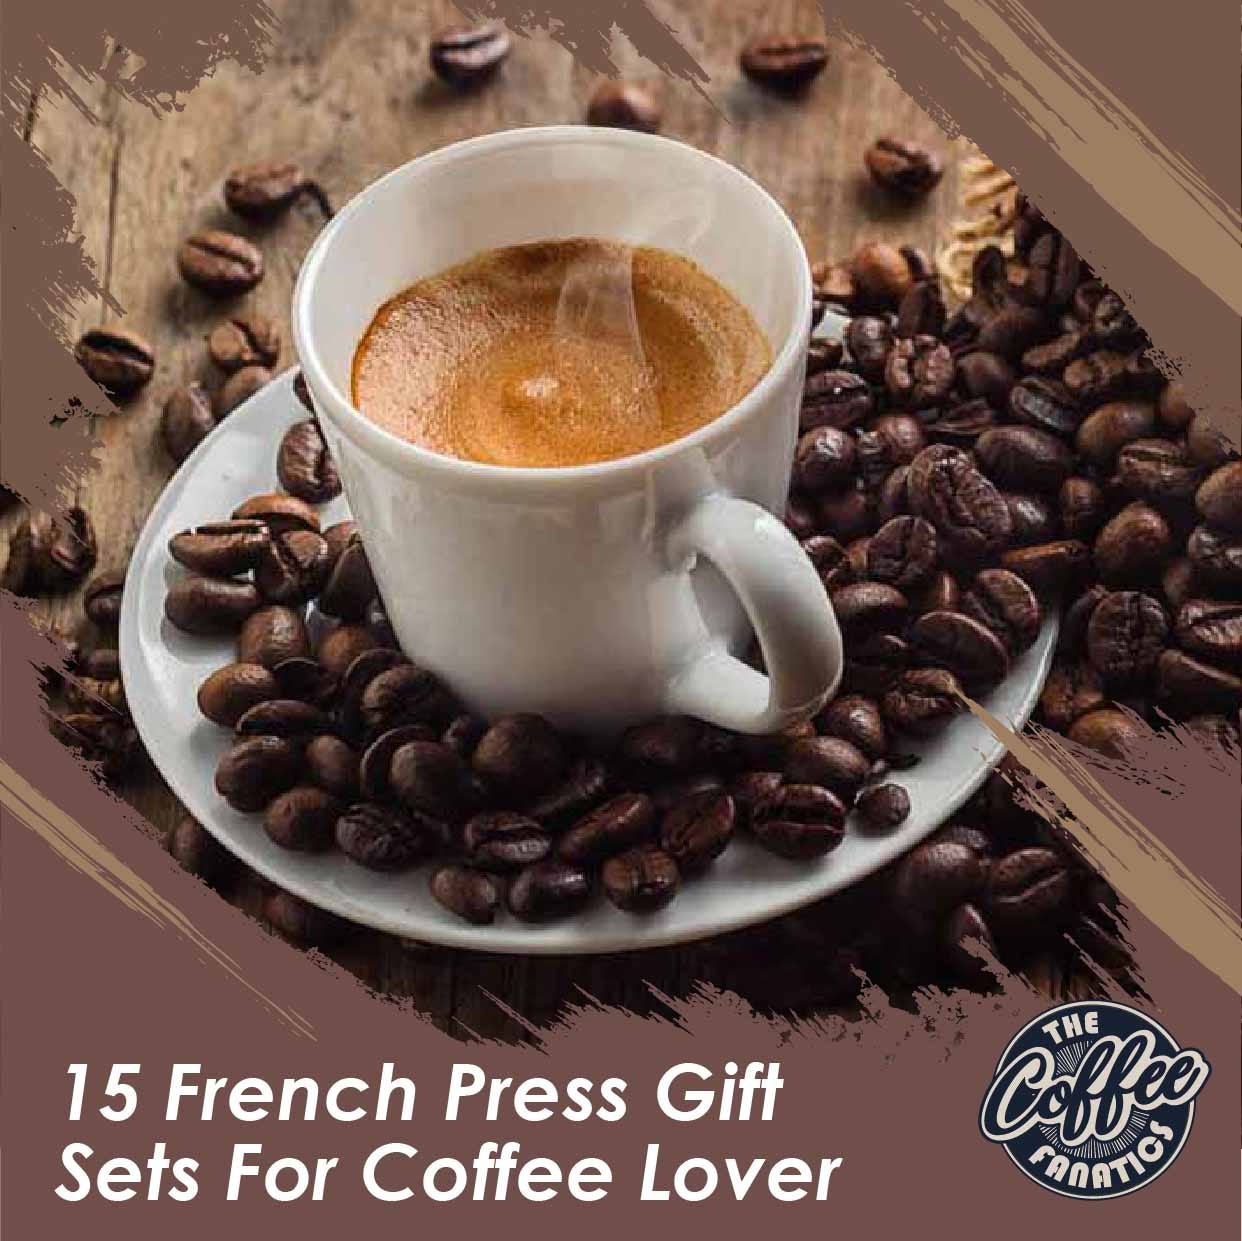 French Press Gift Sets For Coffee Lovers